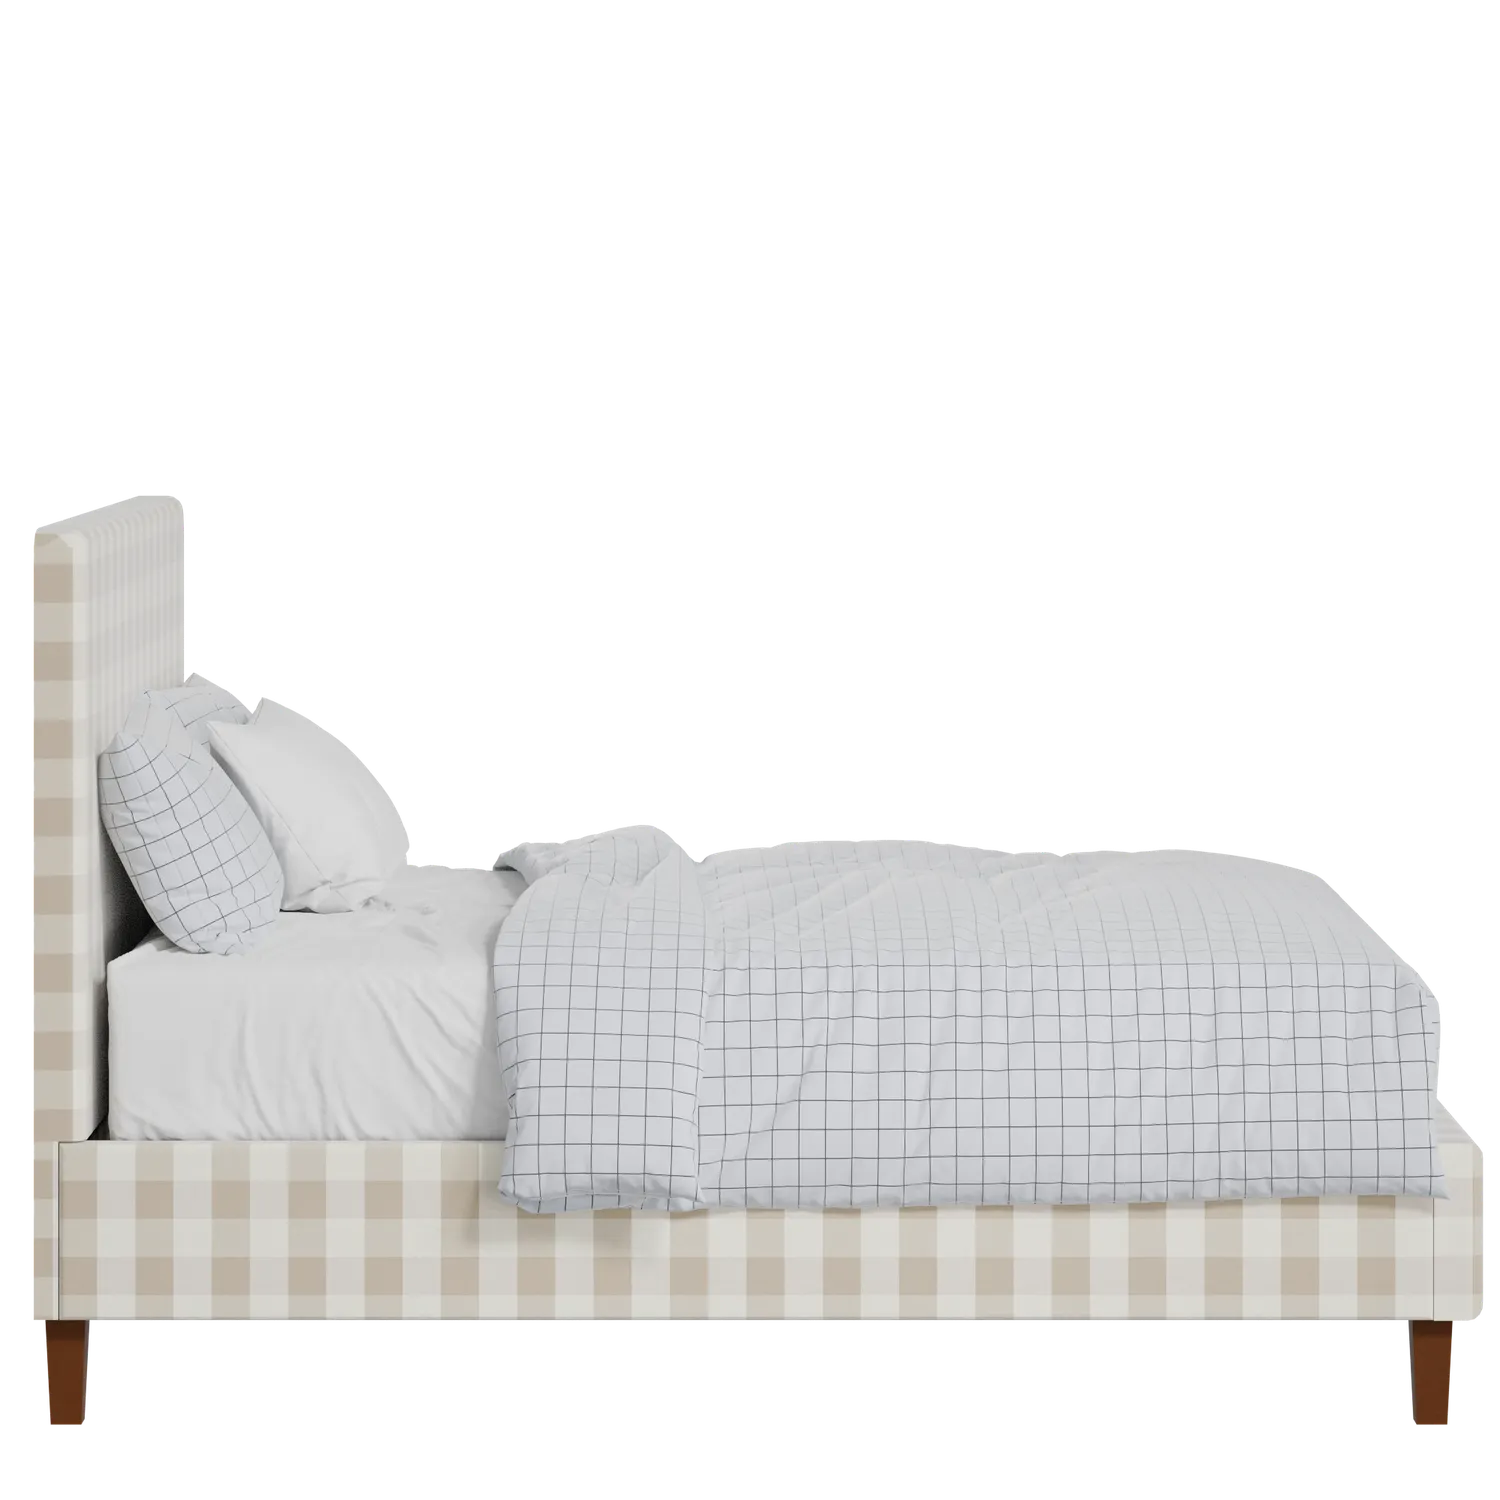 Porto Slim upholstered bed in Romo Kemble Putty fabric with Juno mattress